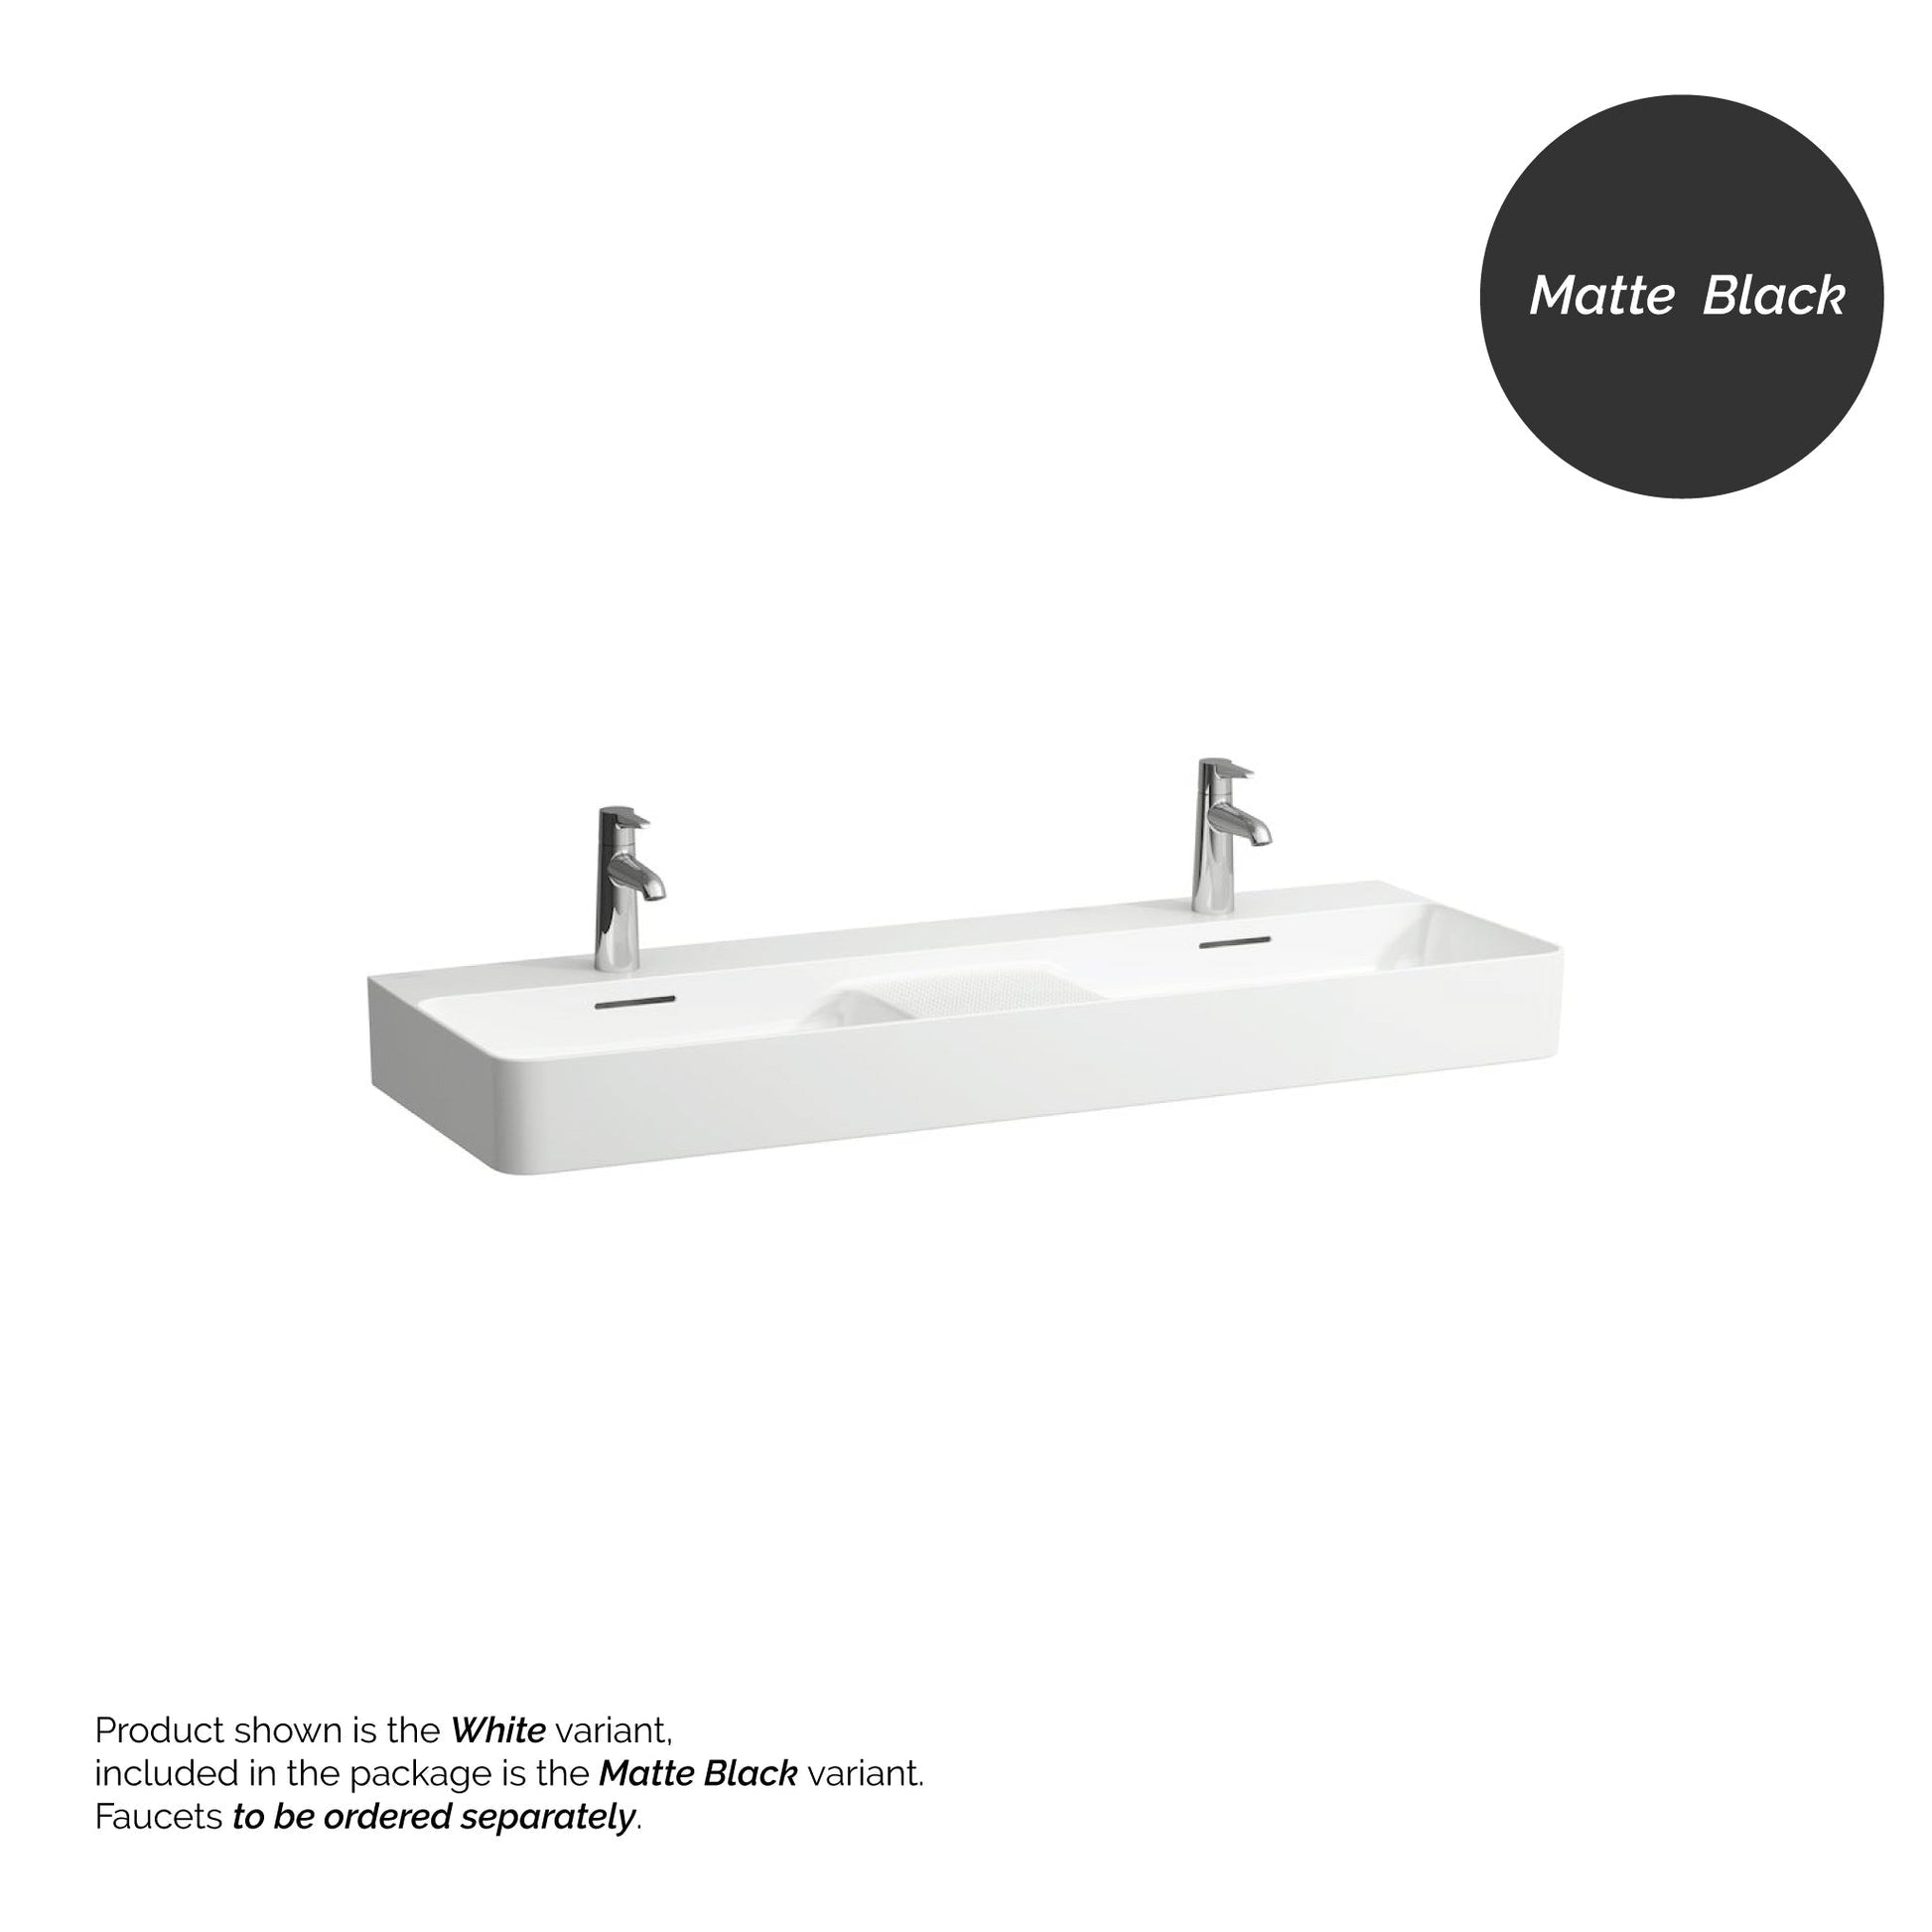 Laufen Val 47" x 17" Matte Black Ceramic Wall-Mounted Double Bathroom Sink With 2 Faucet Holes